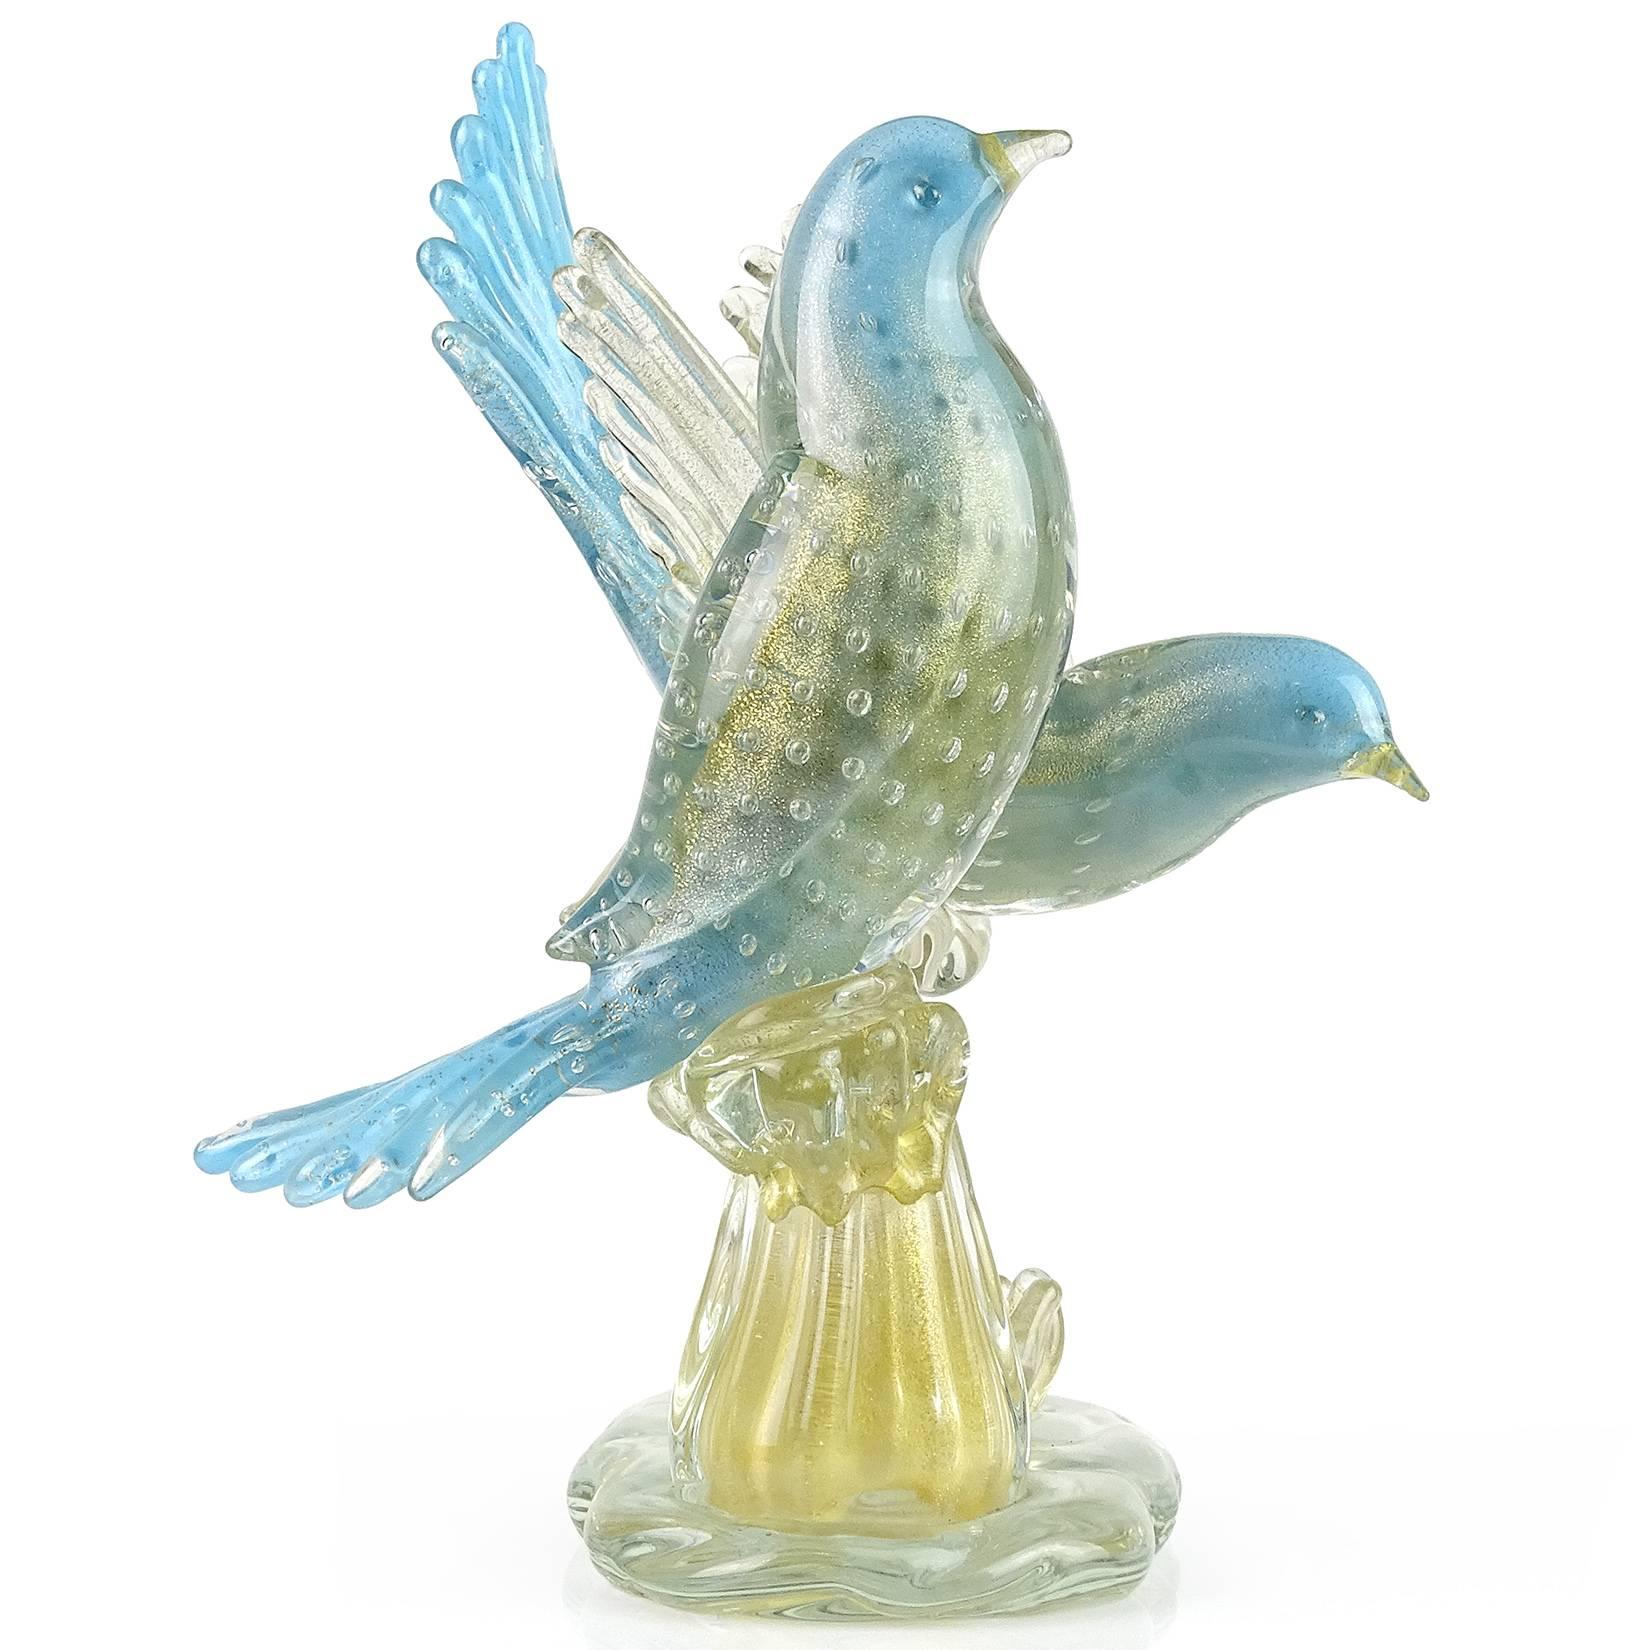 Beautiful large vintage Murano hand blown blue and gold flecks Italian art glass courting birds sculpture on branch. Attributed to designer Alfredo Barbini for the Salviati company, circa 1950s. The wings of one bird have gold leaf, as well as the